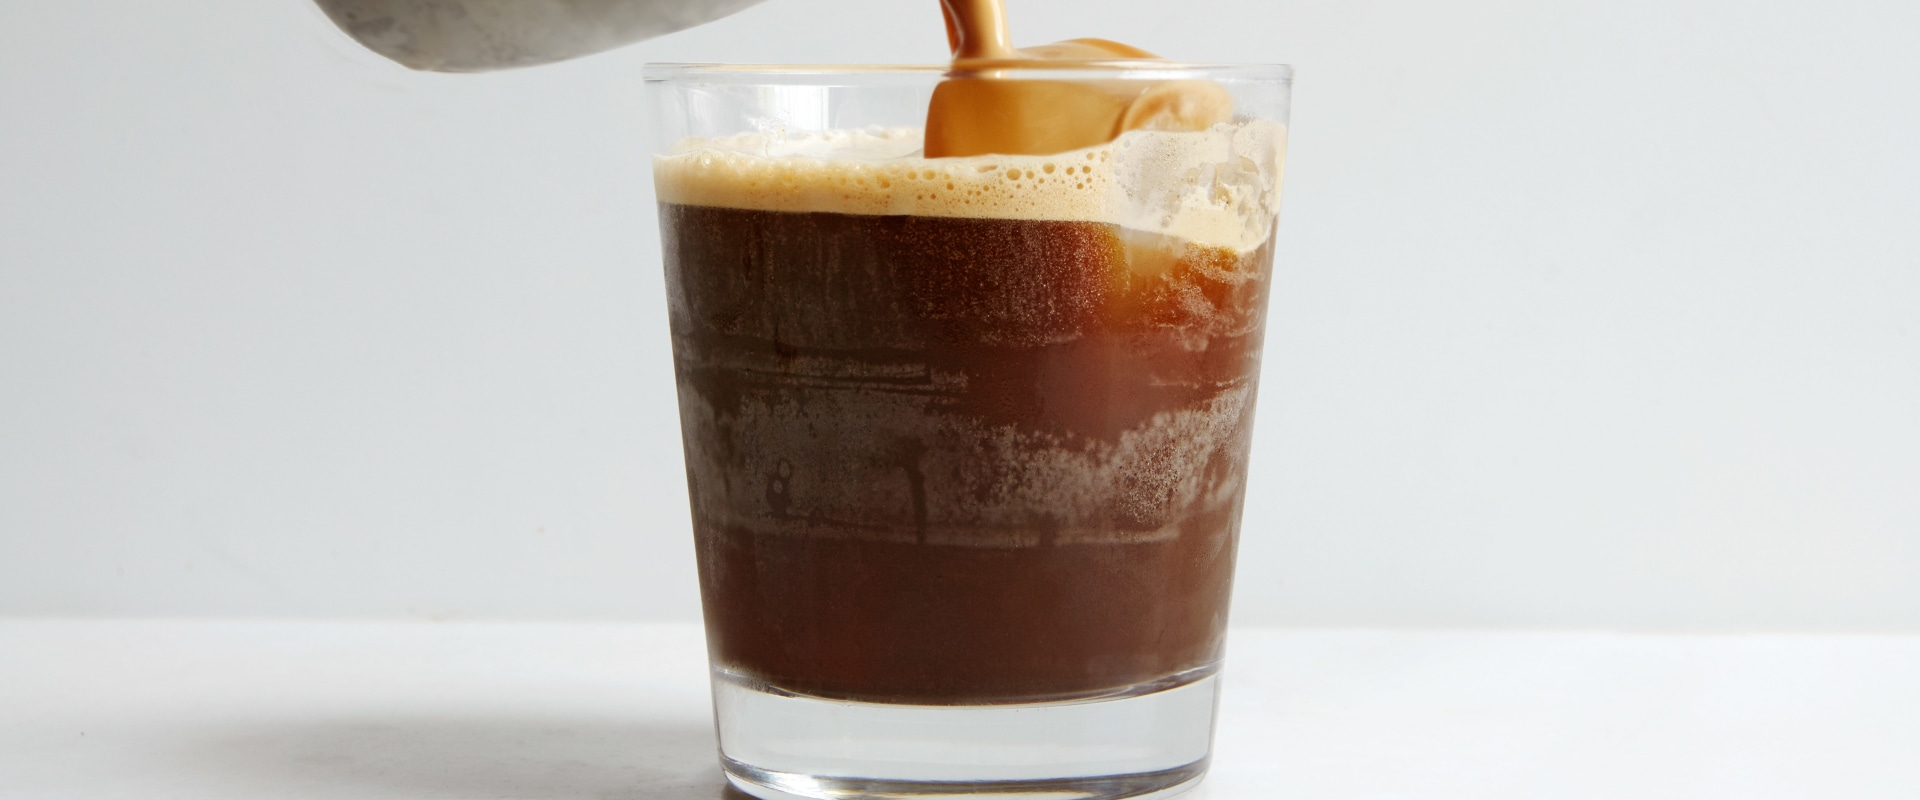 How do you make cold brew coffee not sour?